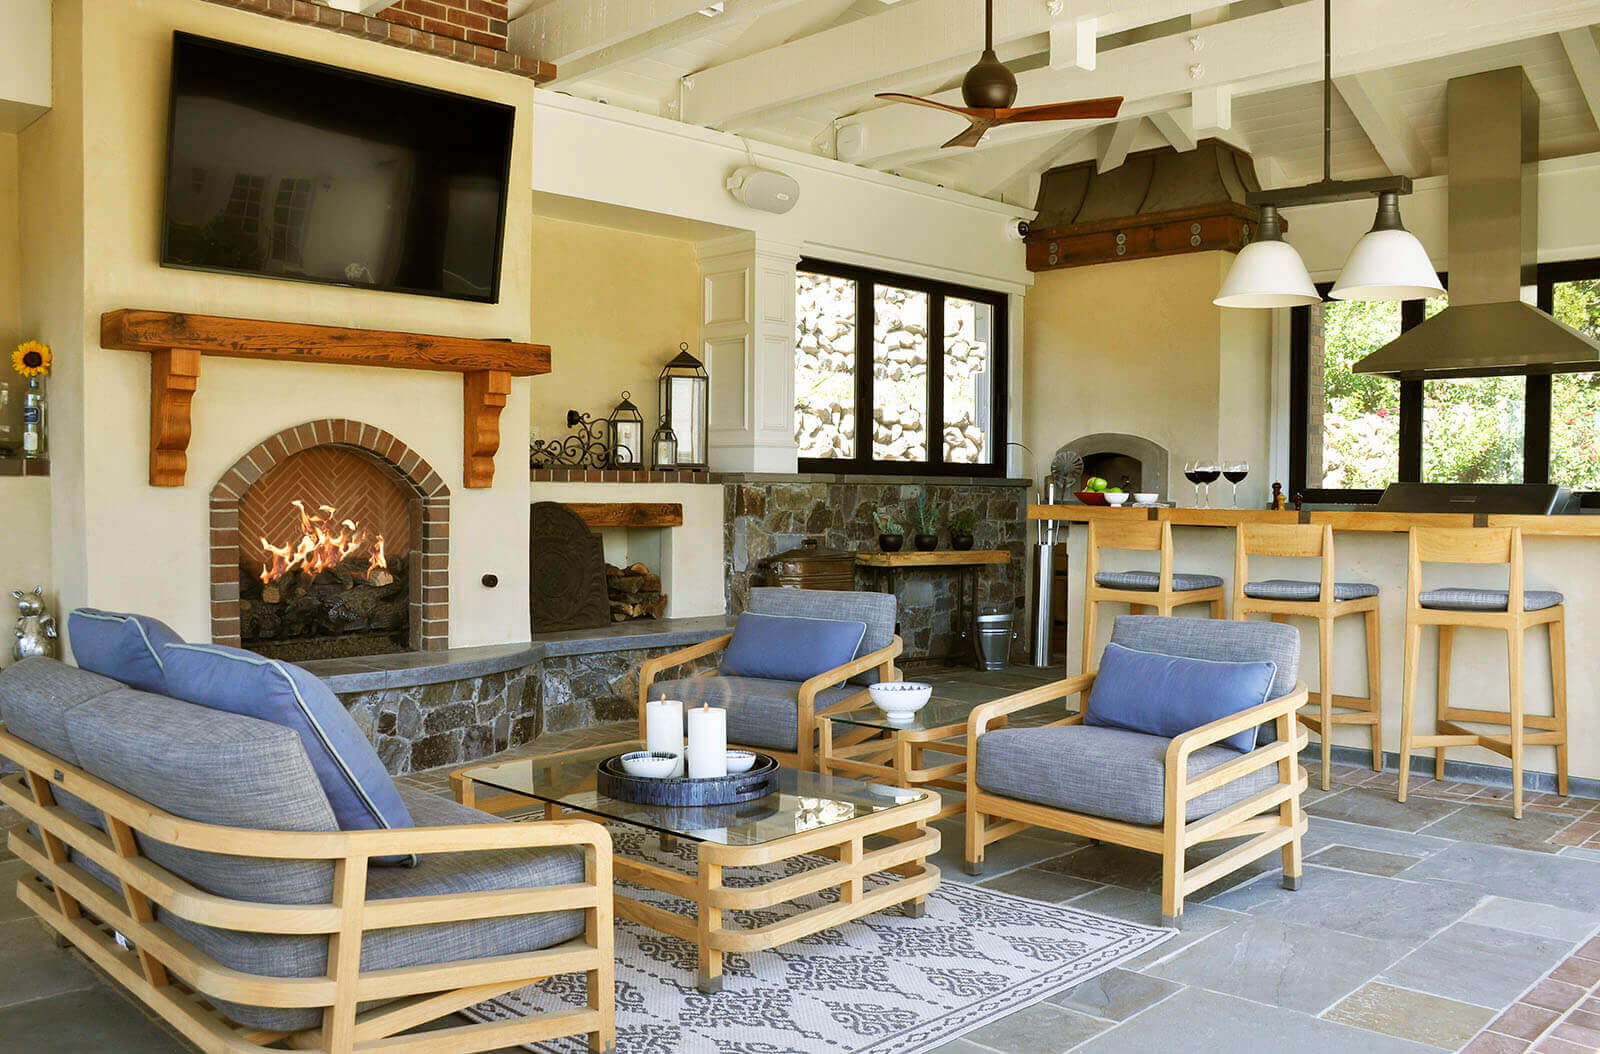 Indoor/outdoor cabana features a fireplace with lounge adjacent to bar